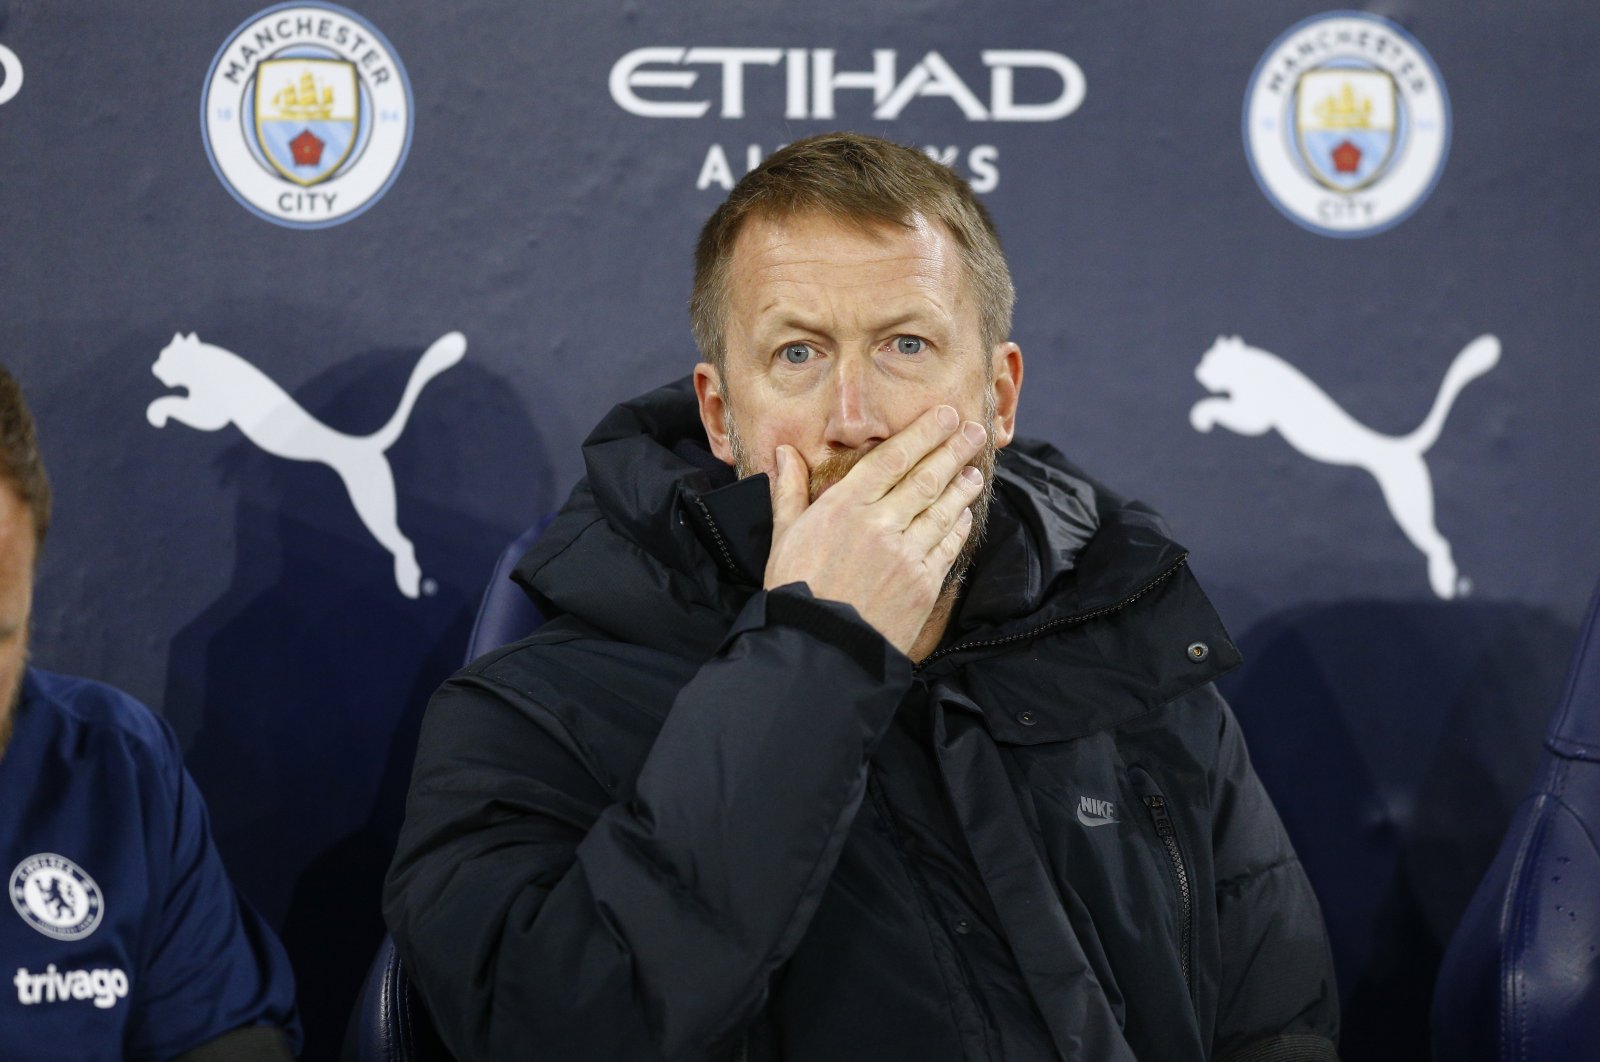 Chelsea manager Graham Potter during the Emirates FA Cup Third Round match between Manchester City and Chelsea at Etihad Stadium, Manchester, UK., Jan. 8, 2023. (Getty Images Photo)